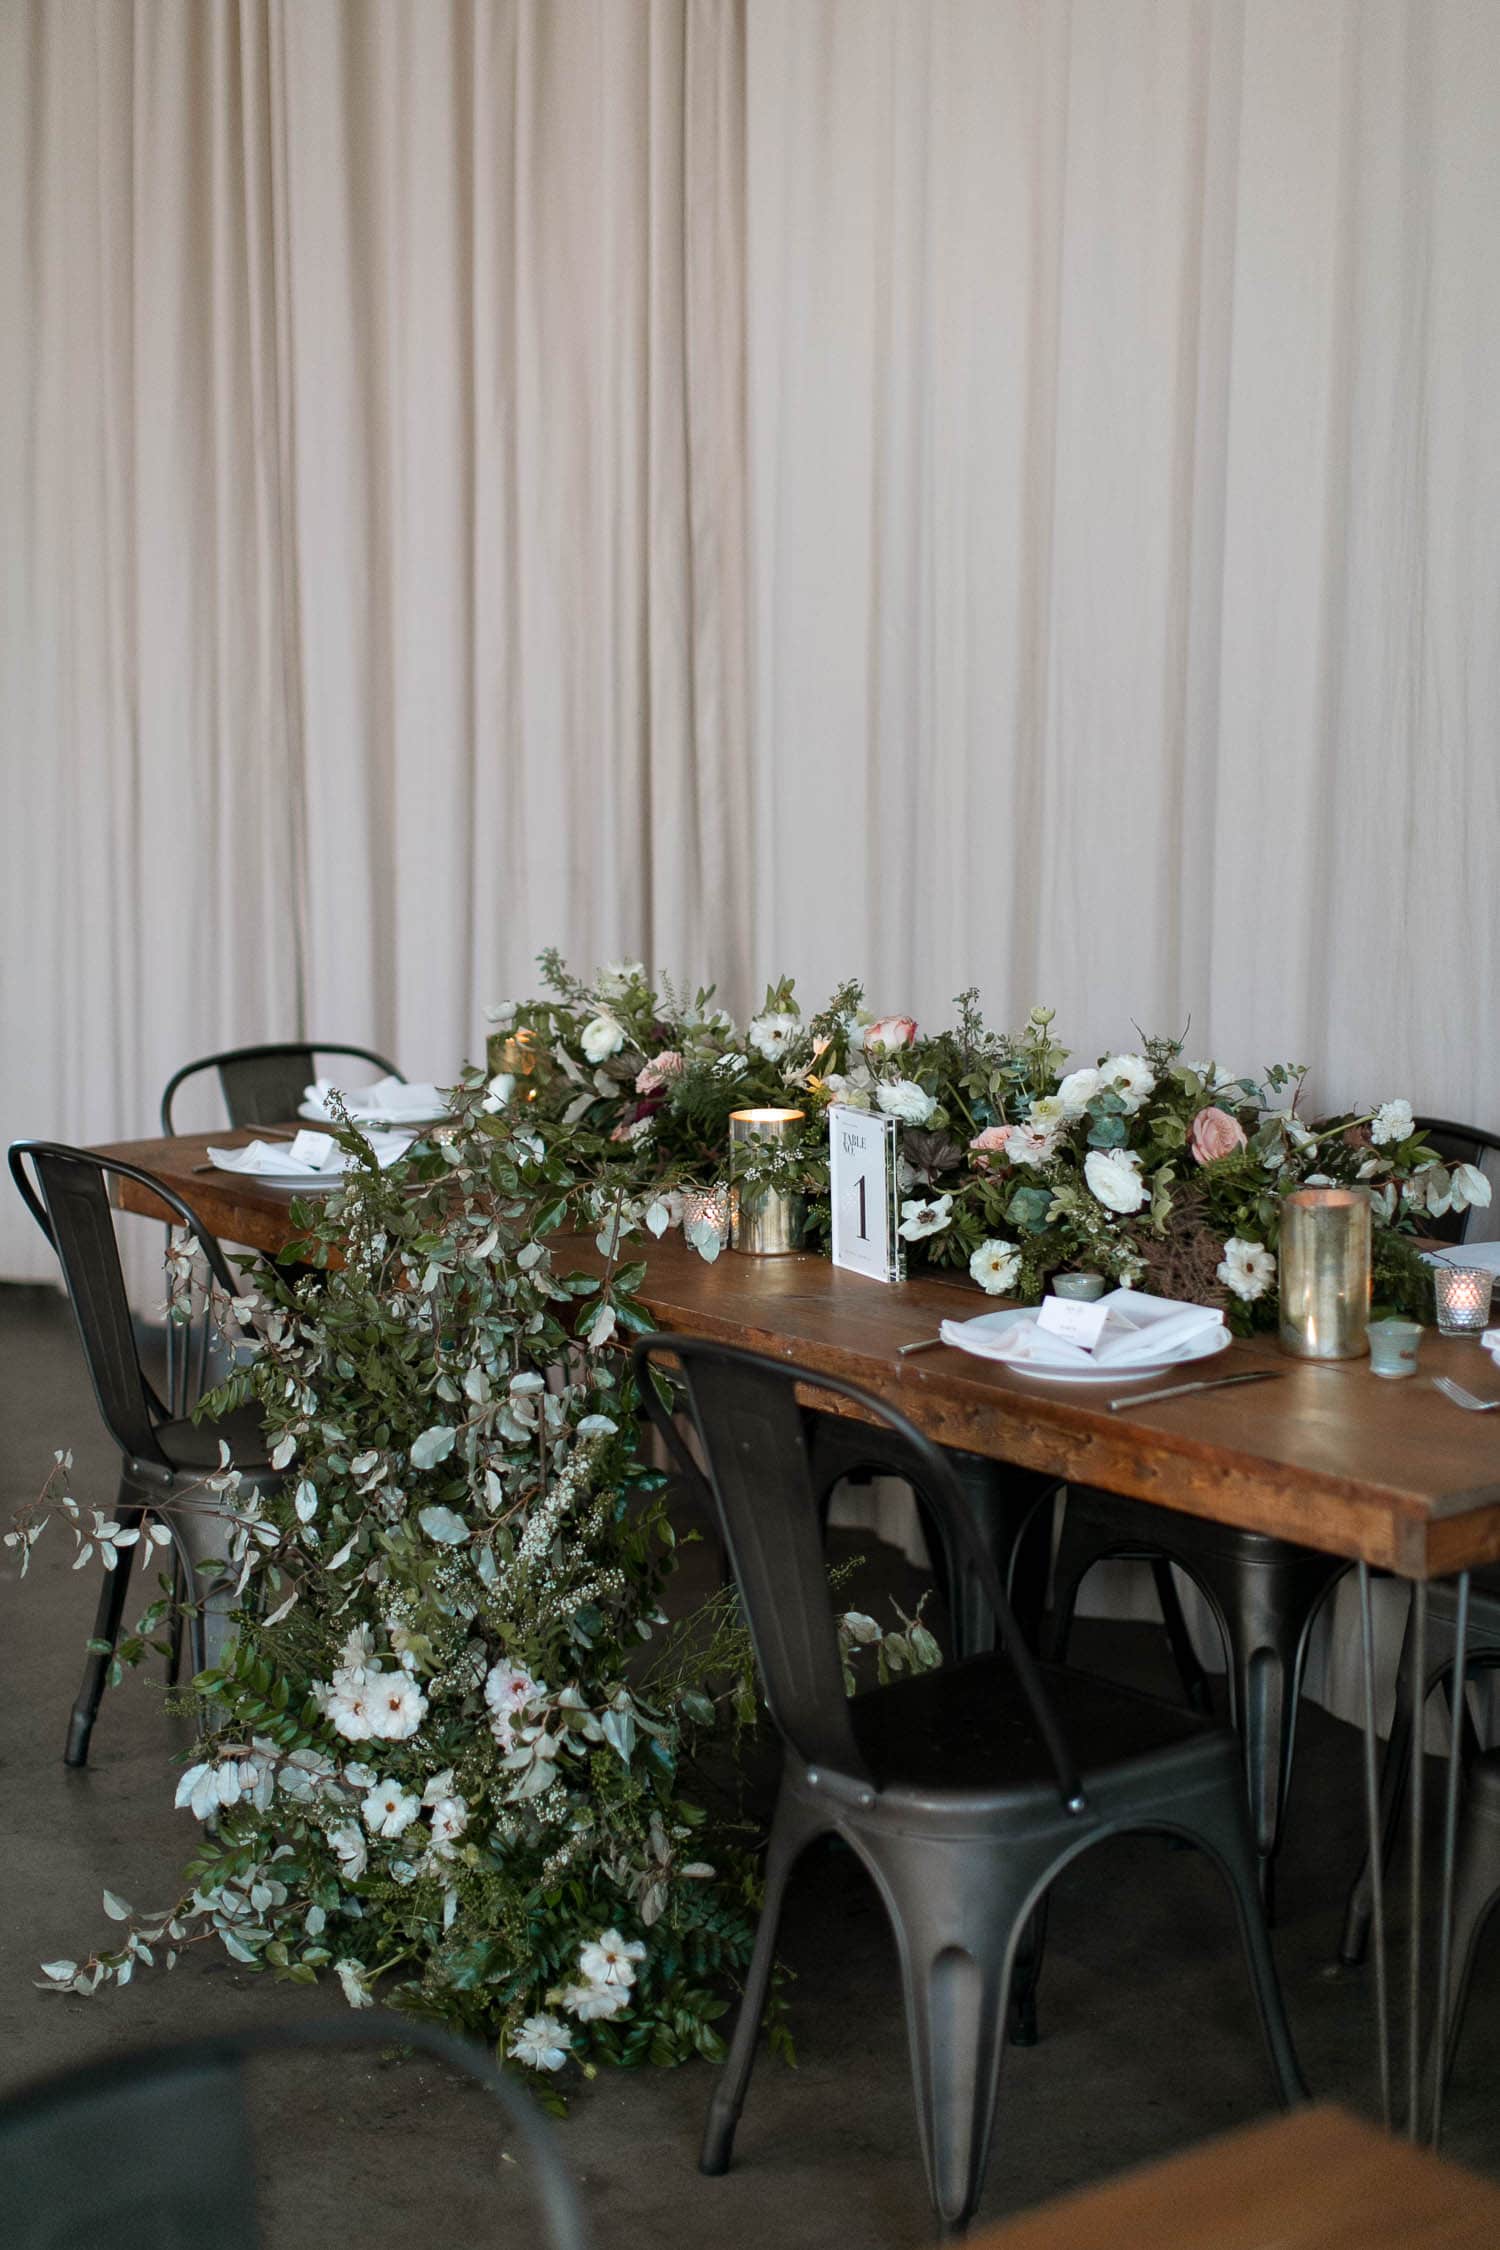 There are white walls, concrete floors, modern farm tables, greenery and candles on the tables. The sweetheart table has white flowers running down to the floor.